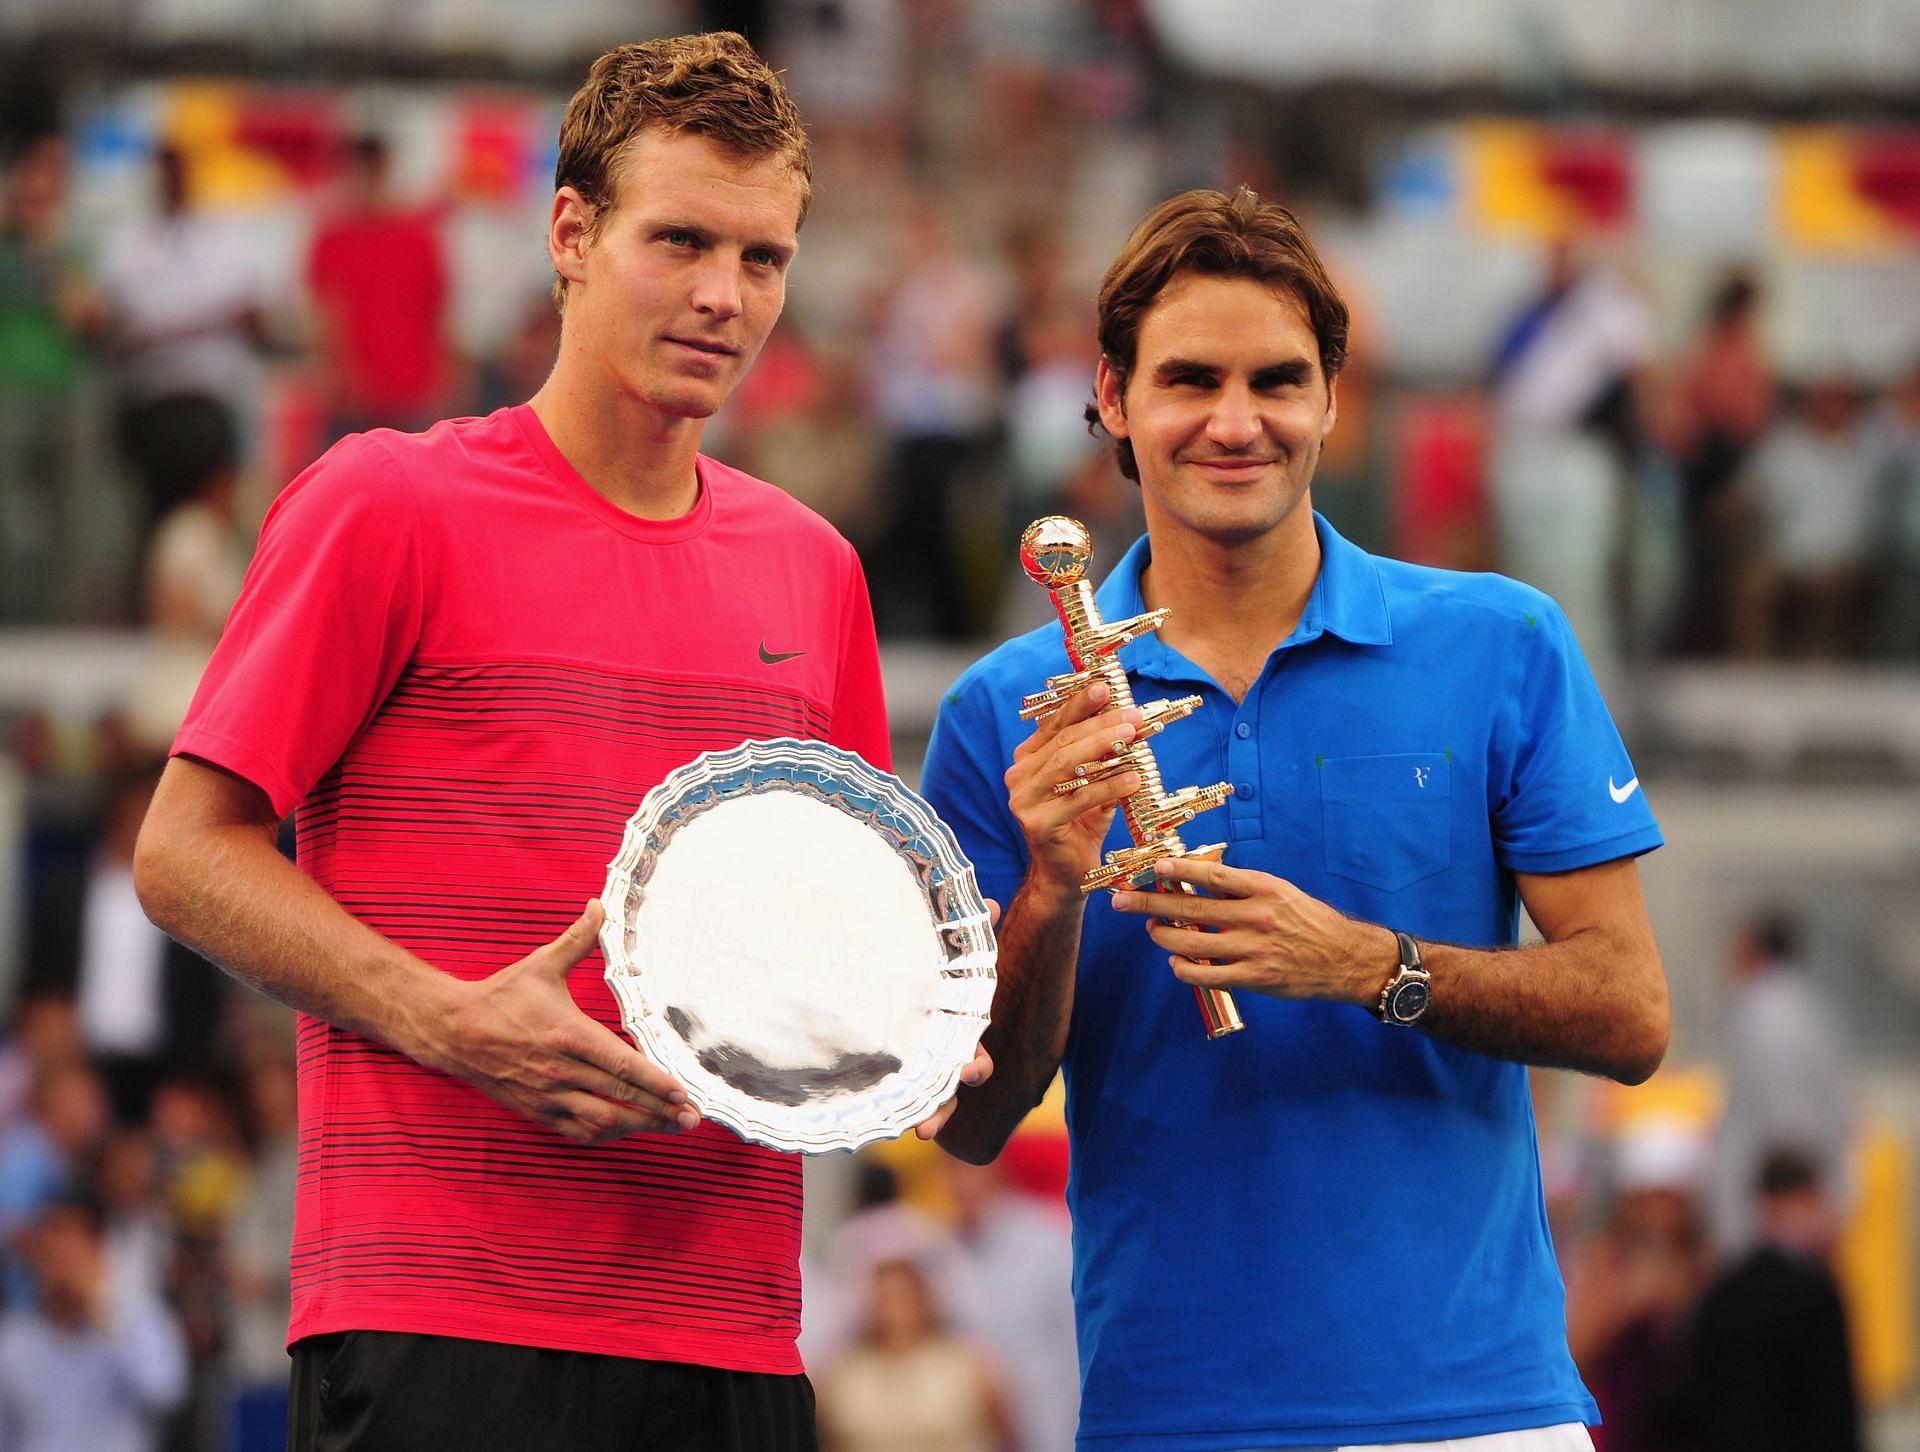 Roger Federer (right) defeated Tomas Berdych in the 2012 Madrid Open final